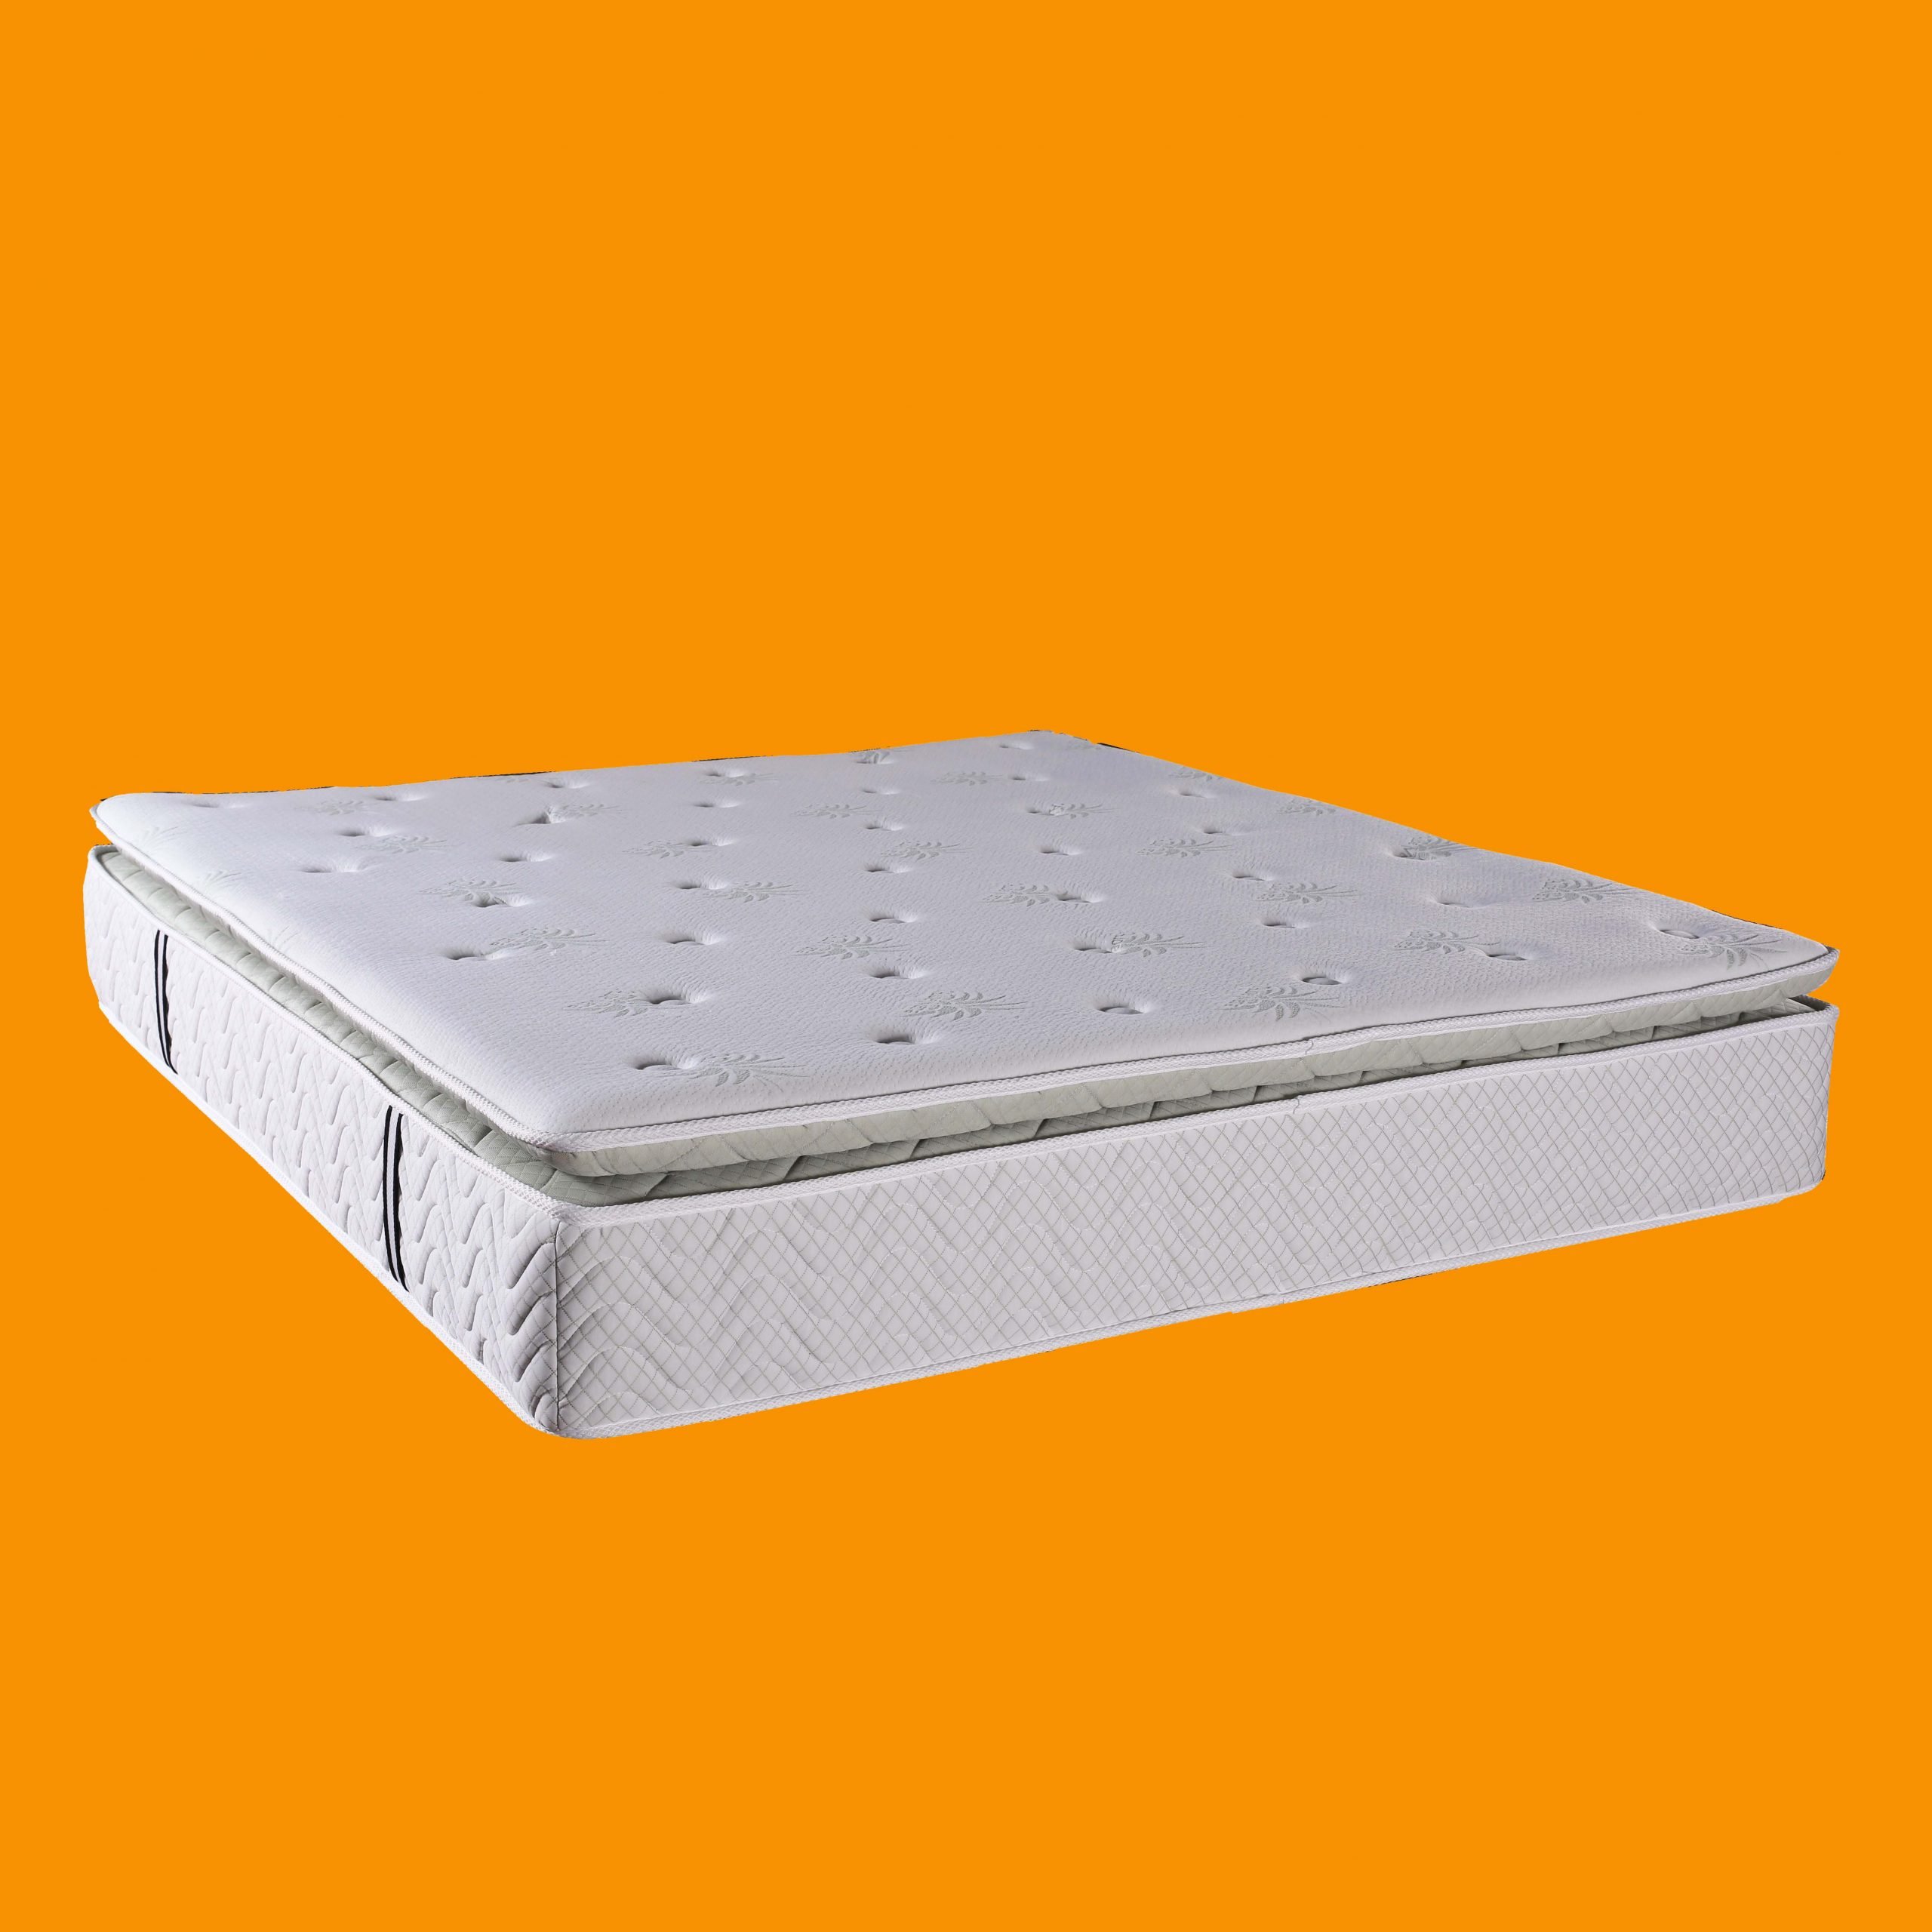 Hot Memory Foam Mattress With Latex Cheap Double Bed ...